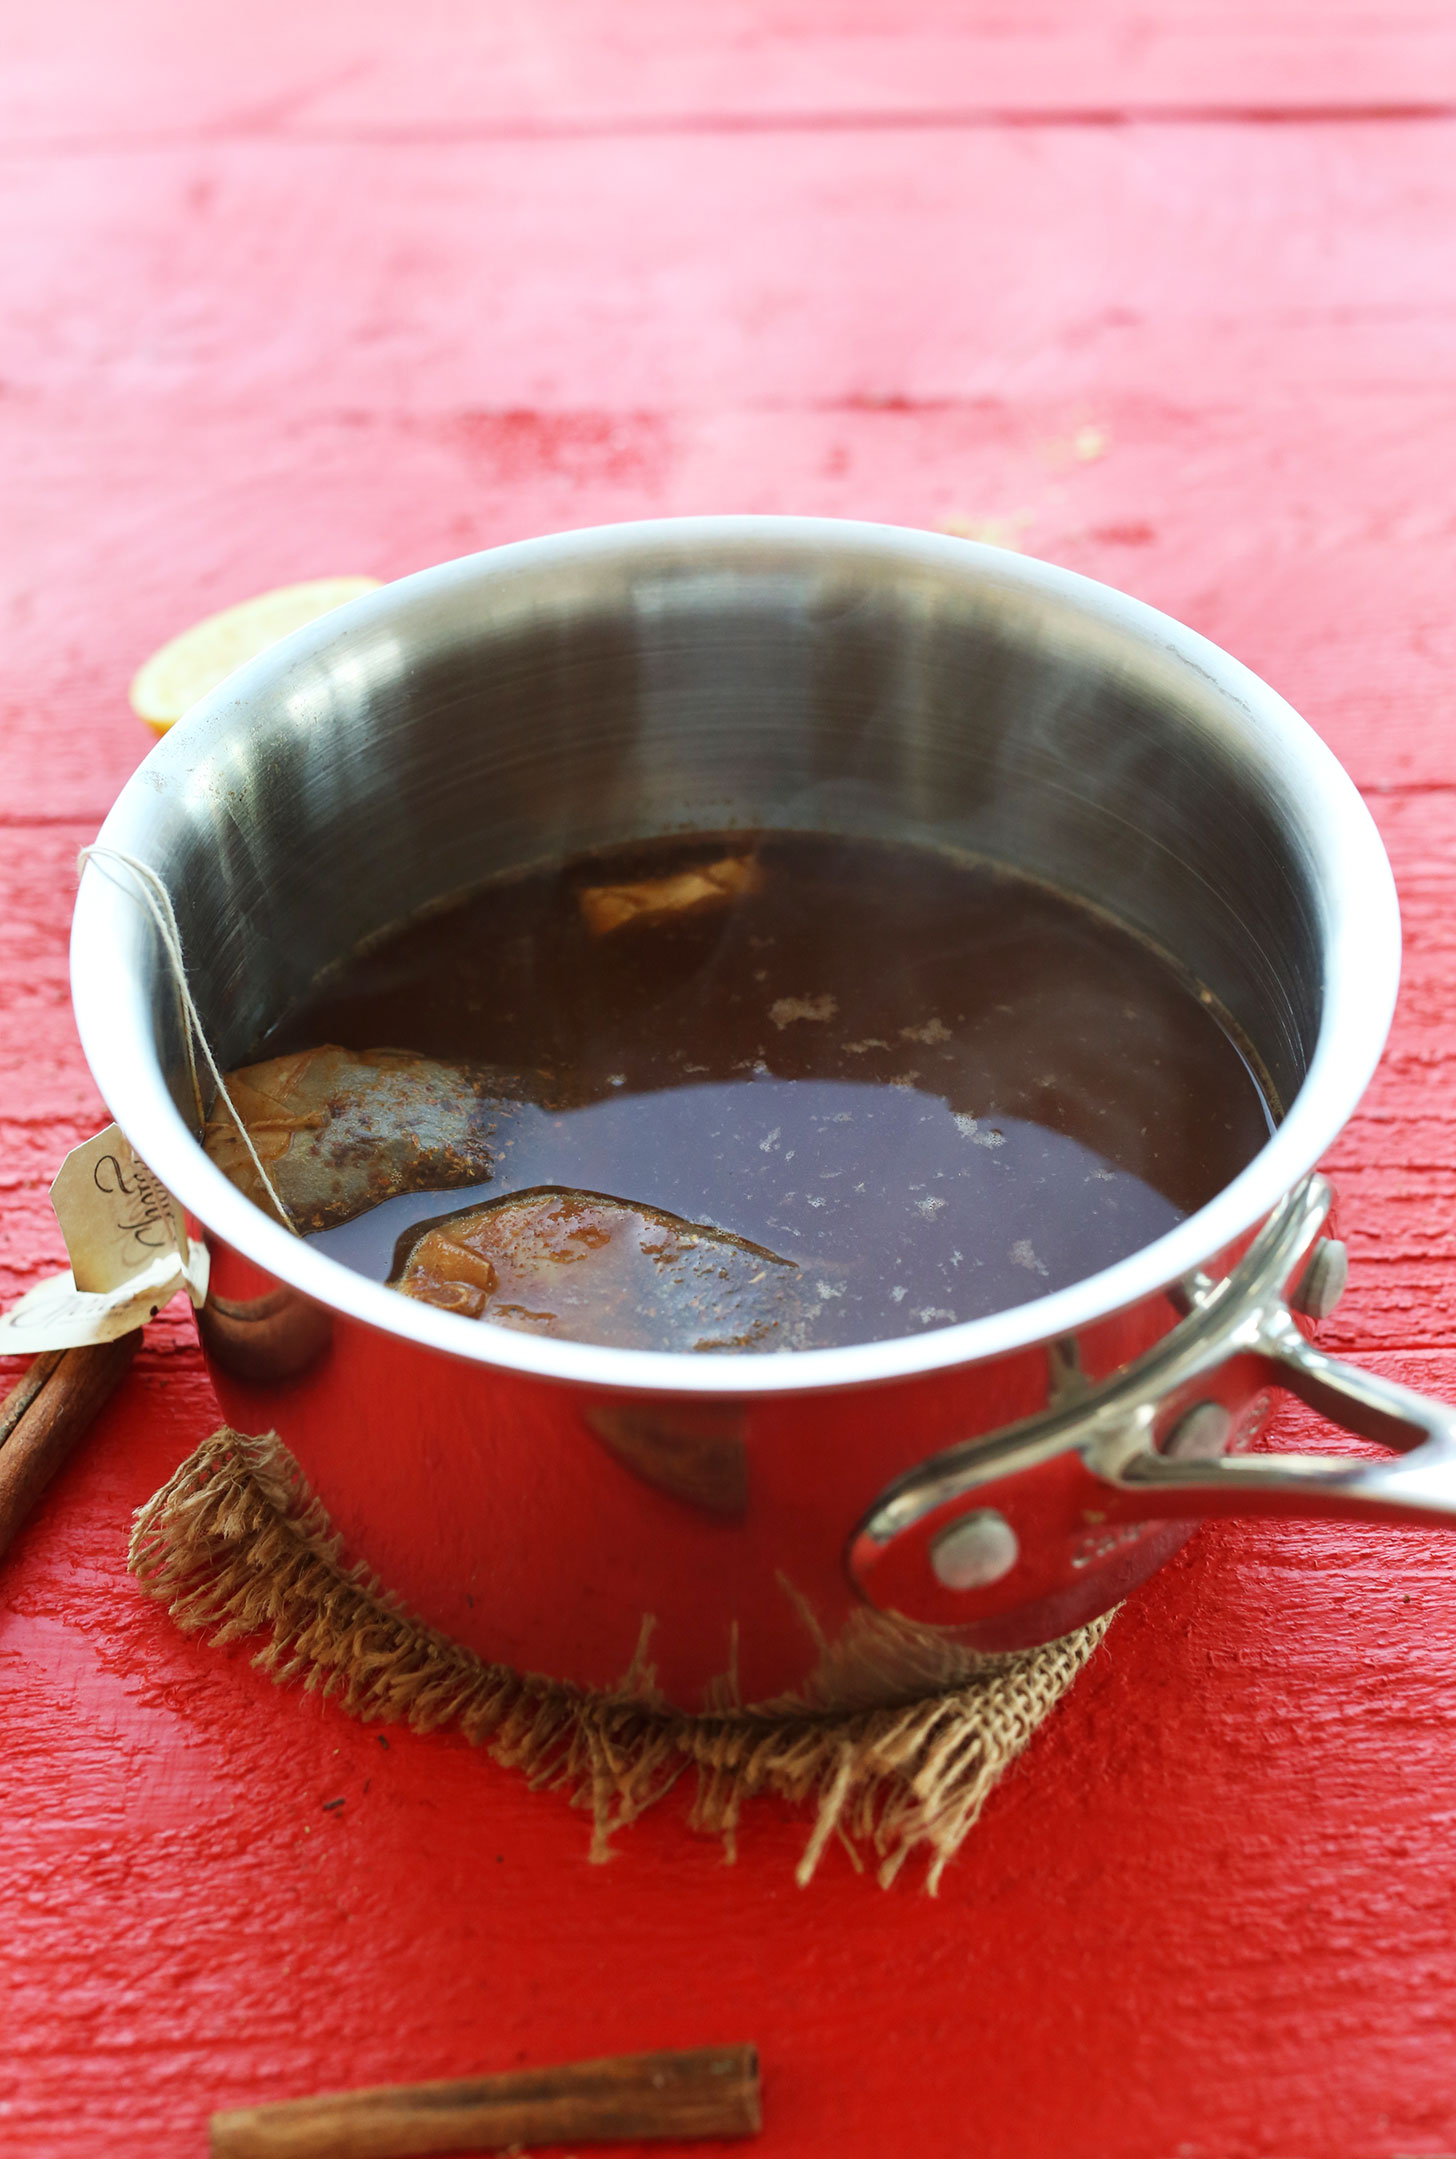 Brewing rooibos tea bags in a saucepan for our Rooibos Hot Toddy recipe